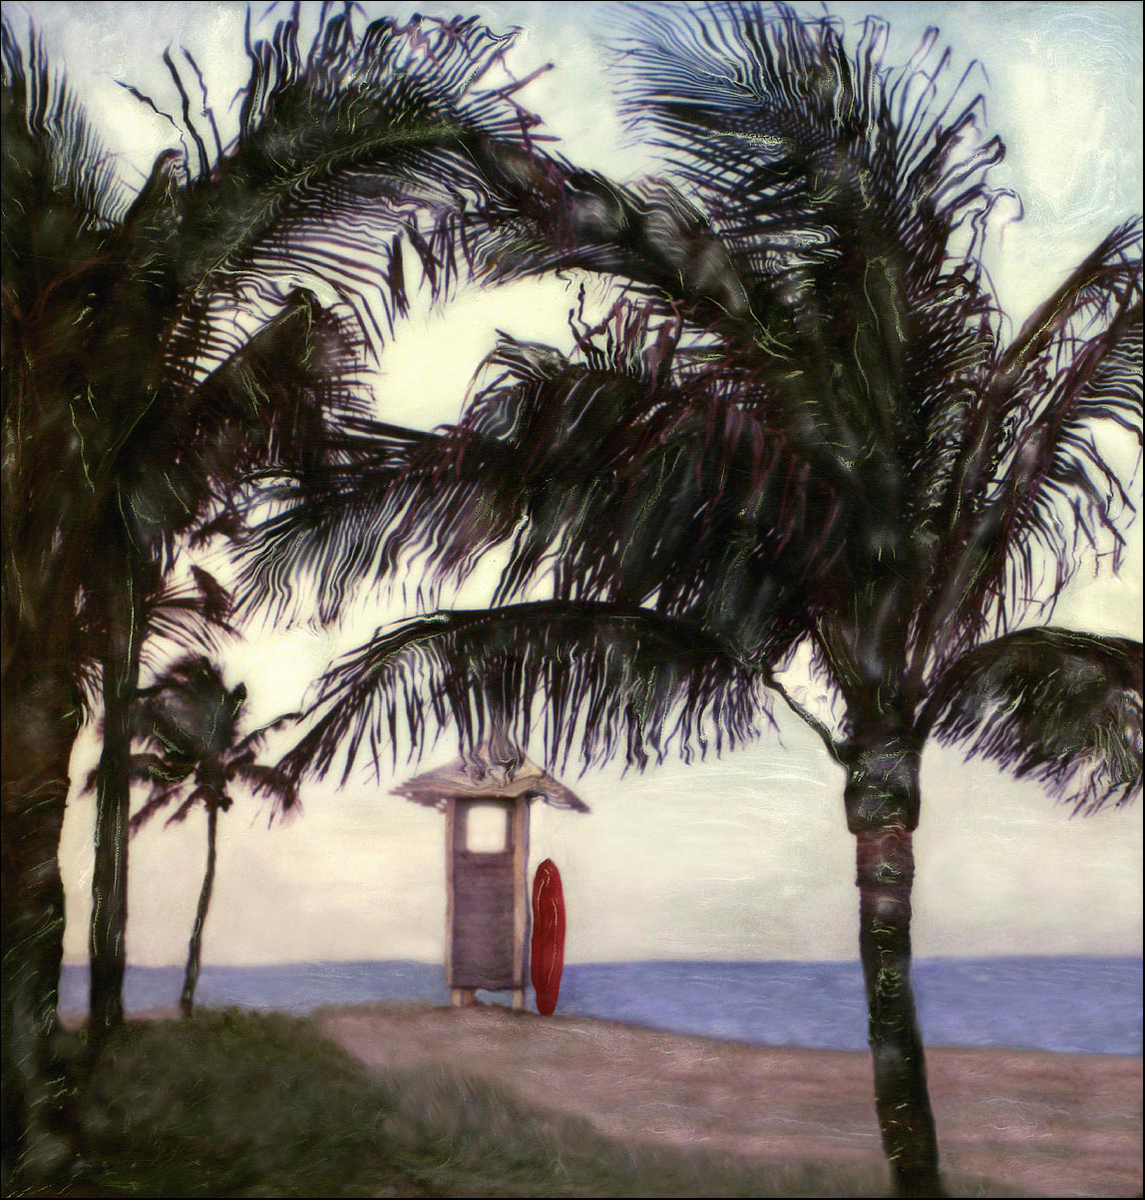 "Looking North on Ft Lauderdale Beach" <br>View of Lifeguard Stand and Surf Board through Palms